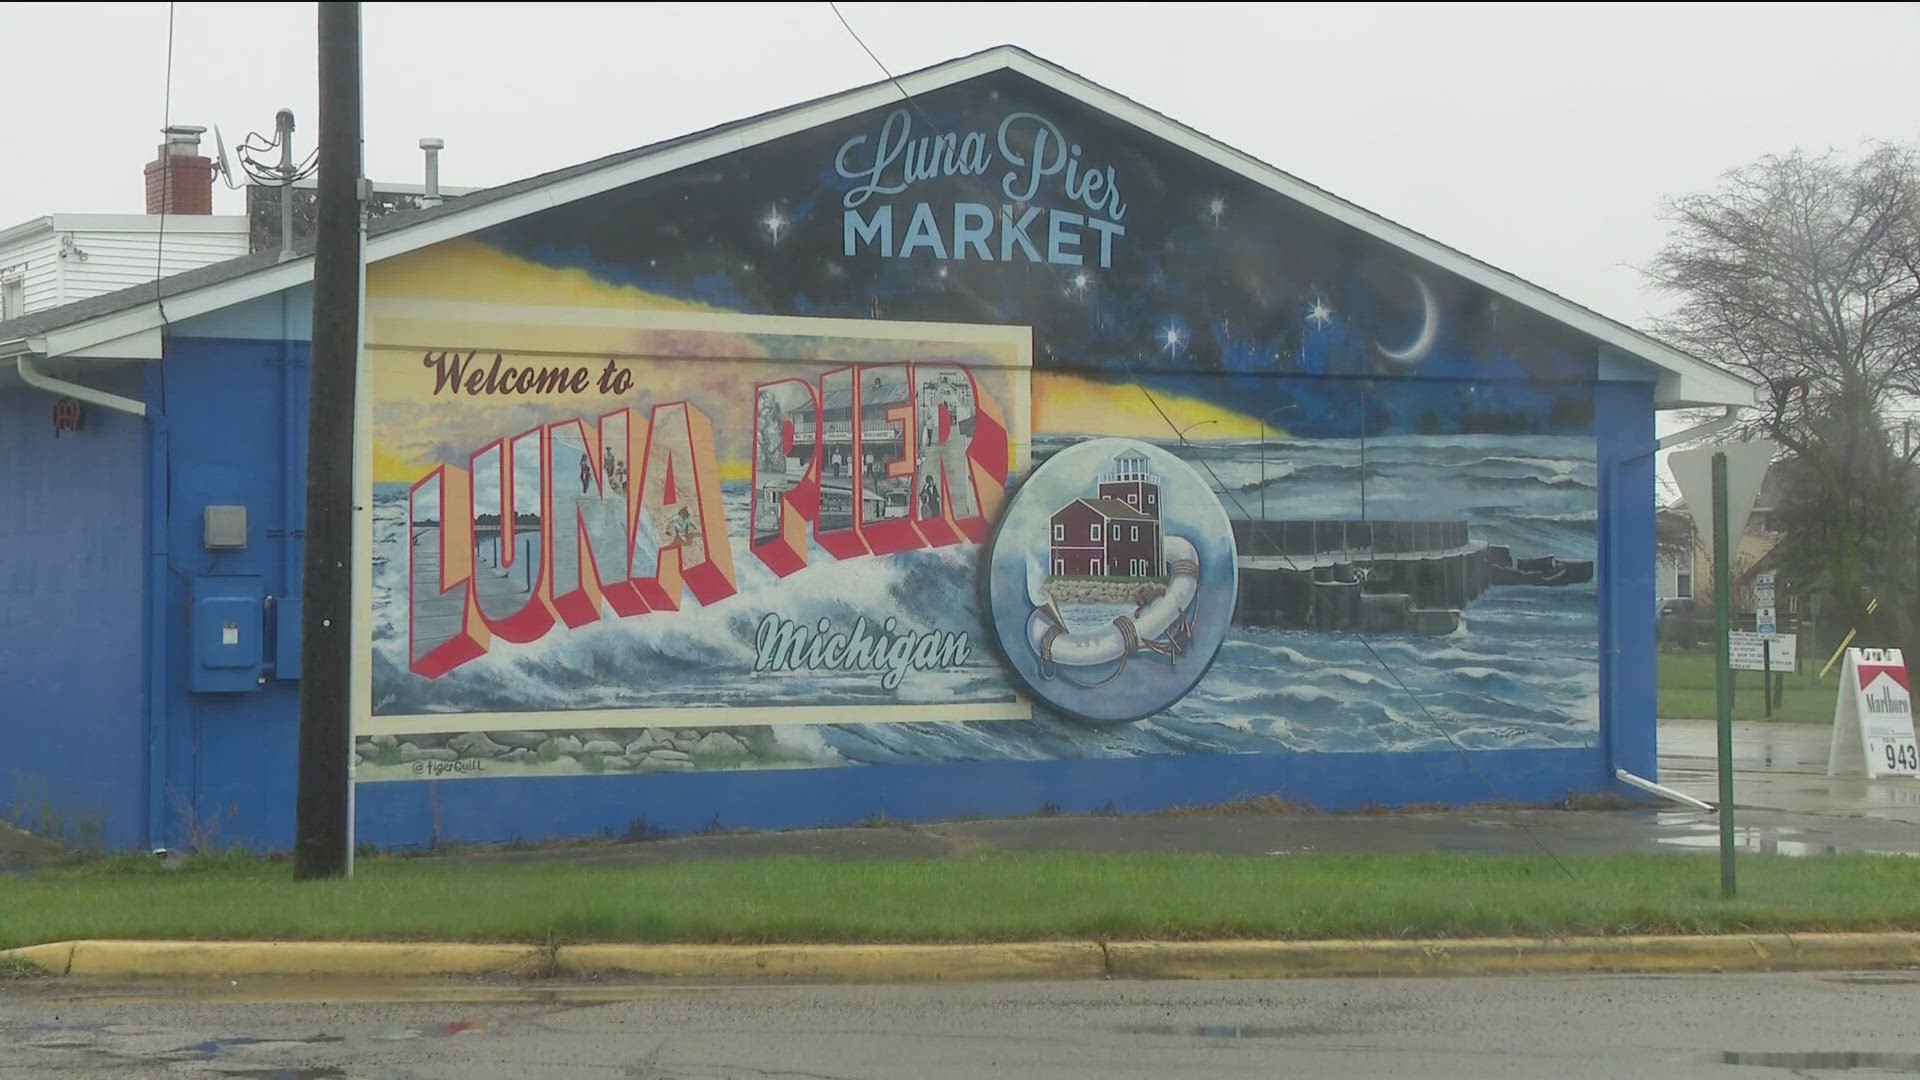 The city of Luna Pier relies on tourists in the summer, but construction is making it be a place where people are being asked not to visit on the day of the eclipse.